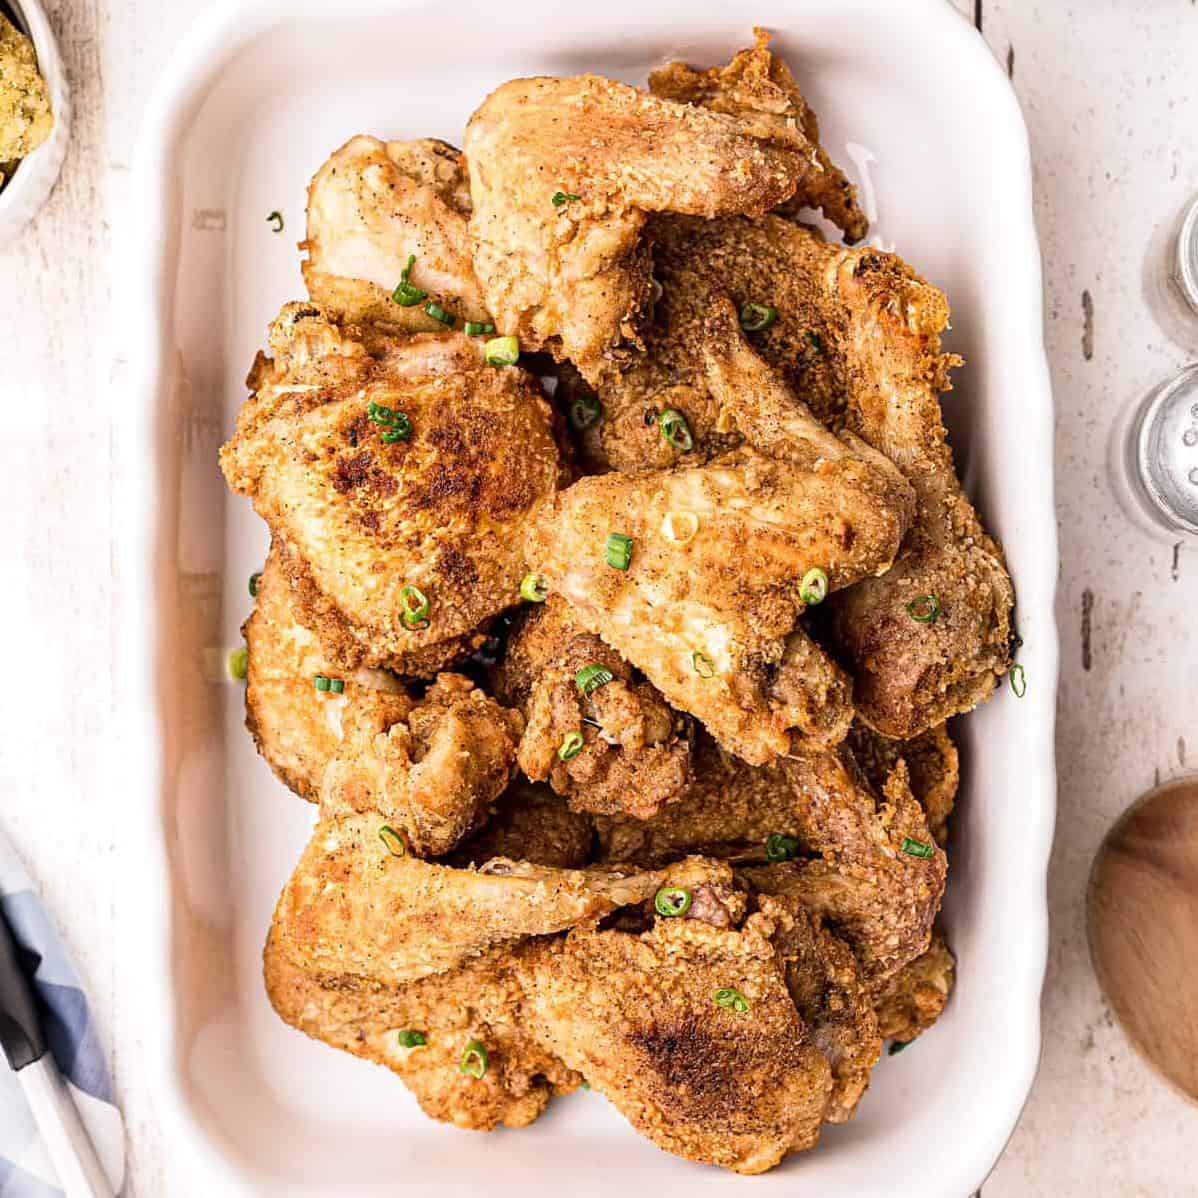  Your guests will be licking their fingers after they try this tasty Wishbone Fried Chicken.